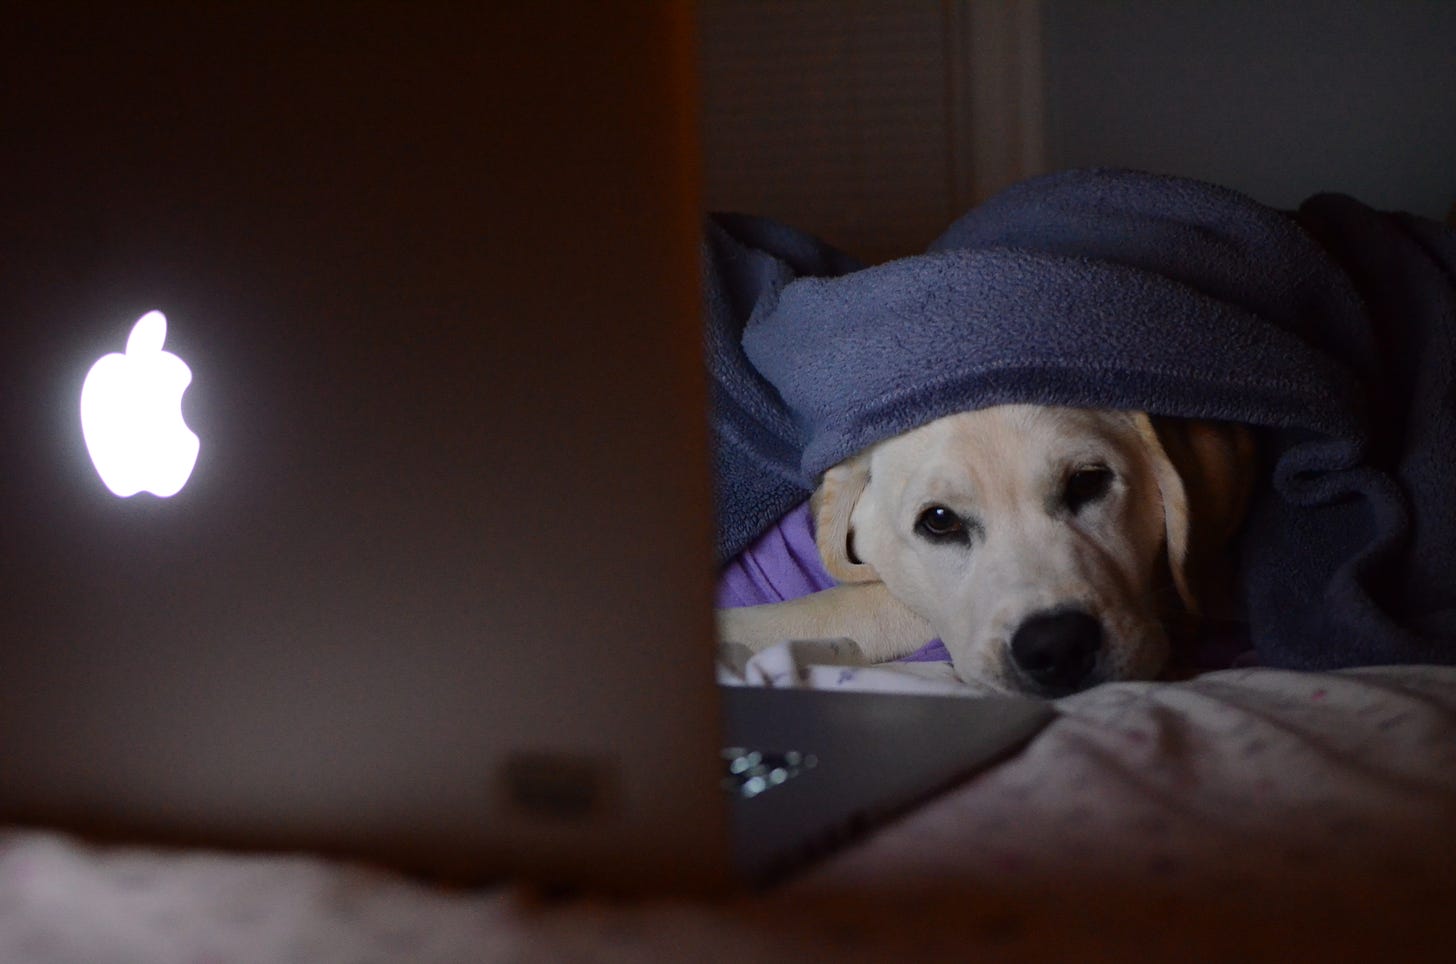 A yellow Labrador retriever is snuggled up under a navy blanket and on top of a pink one with gold polka dots. She's in front of a Macbook laptop that's lighting up her face in the dark.